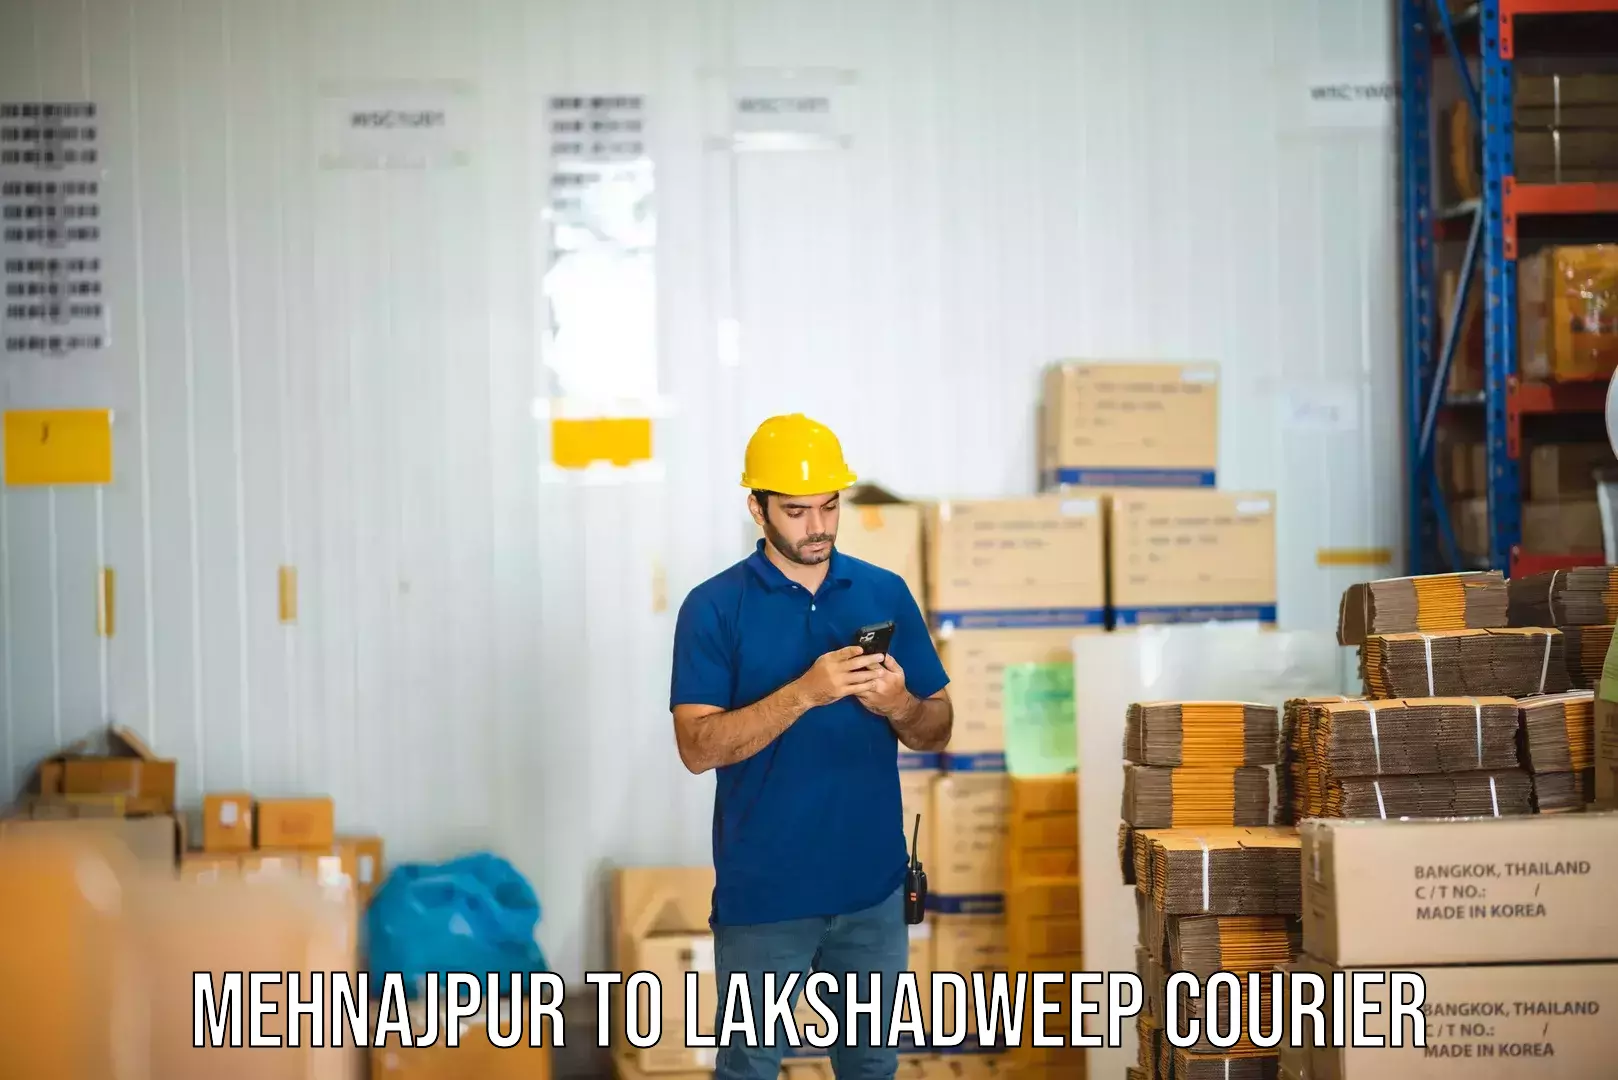 Express delivery capabilities Mehnajpur to Lakshadweep